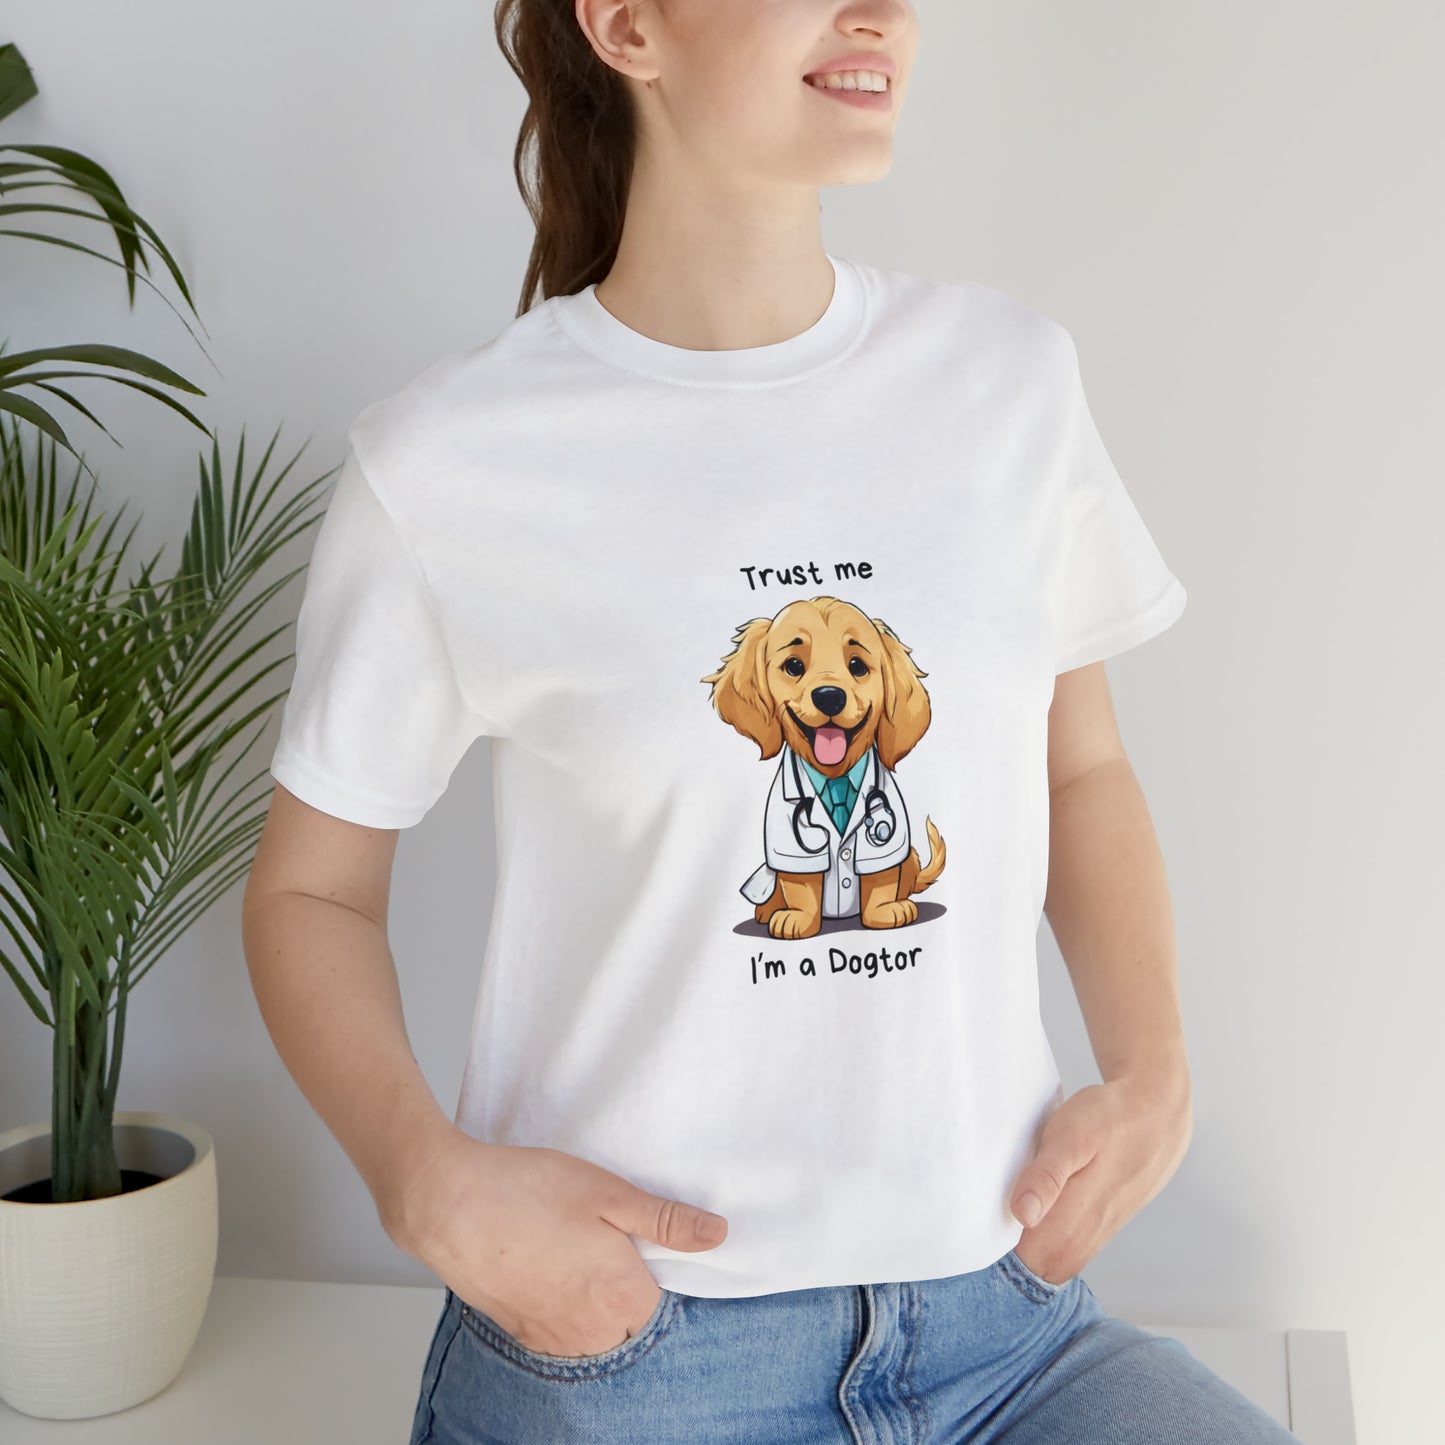 Funny Dog Doctor Unisex short sleeve T-Shirt with Ultra soft-cotton white